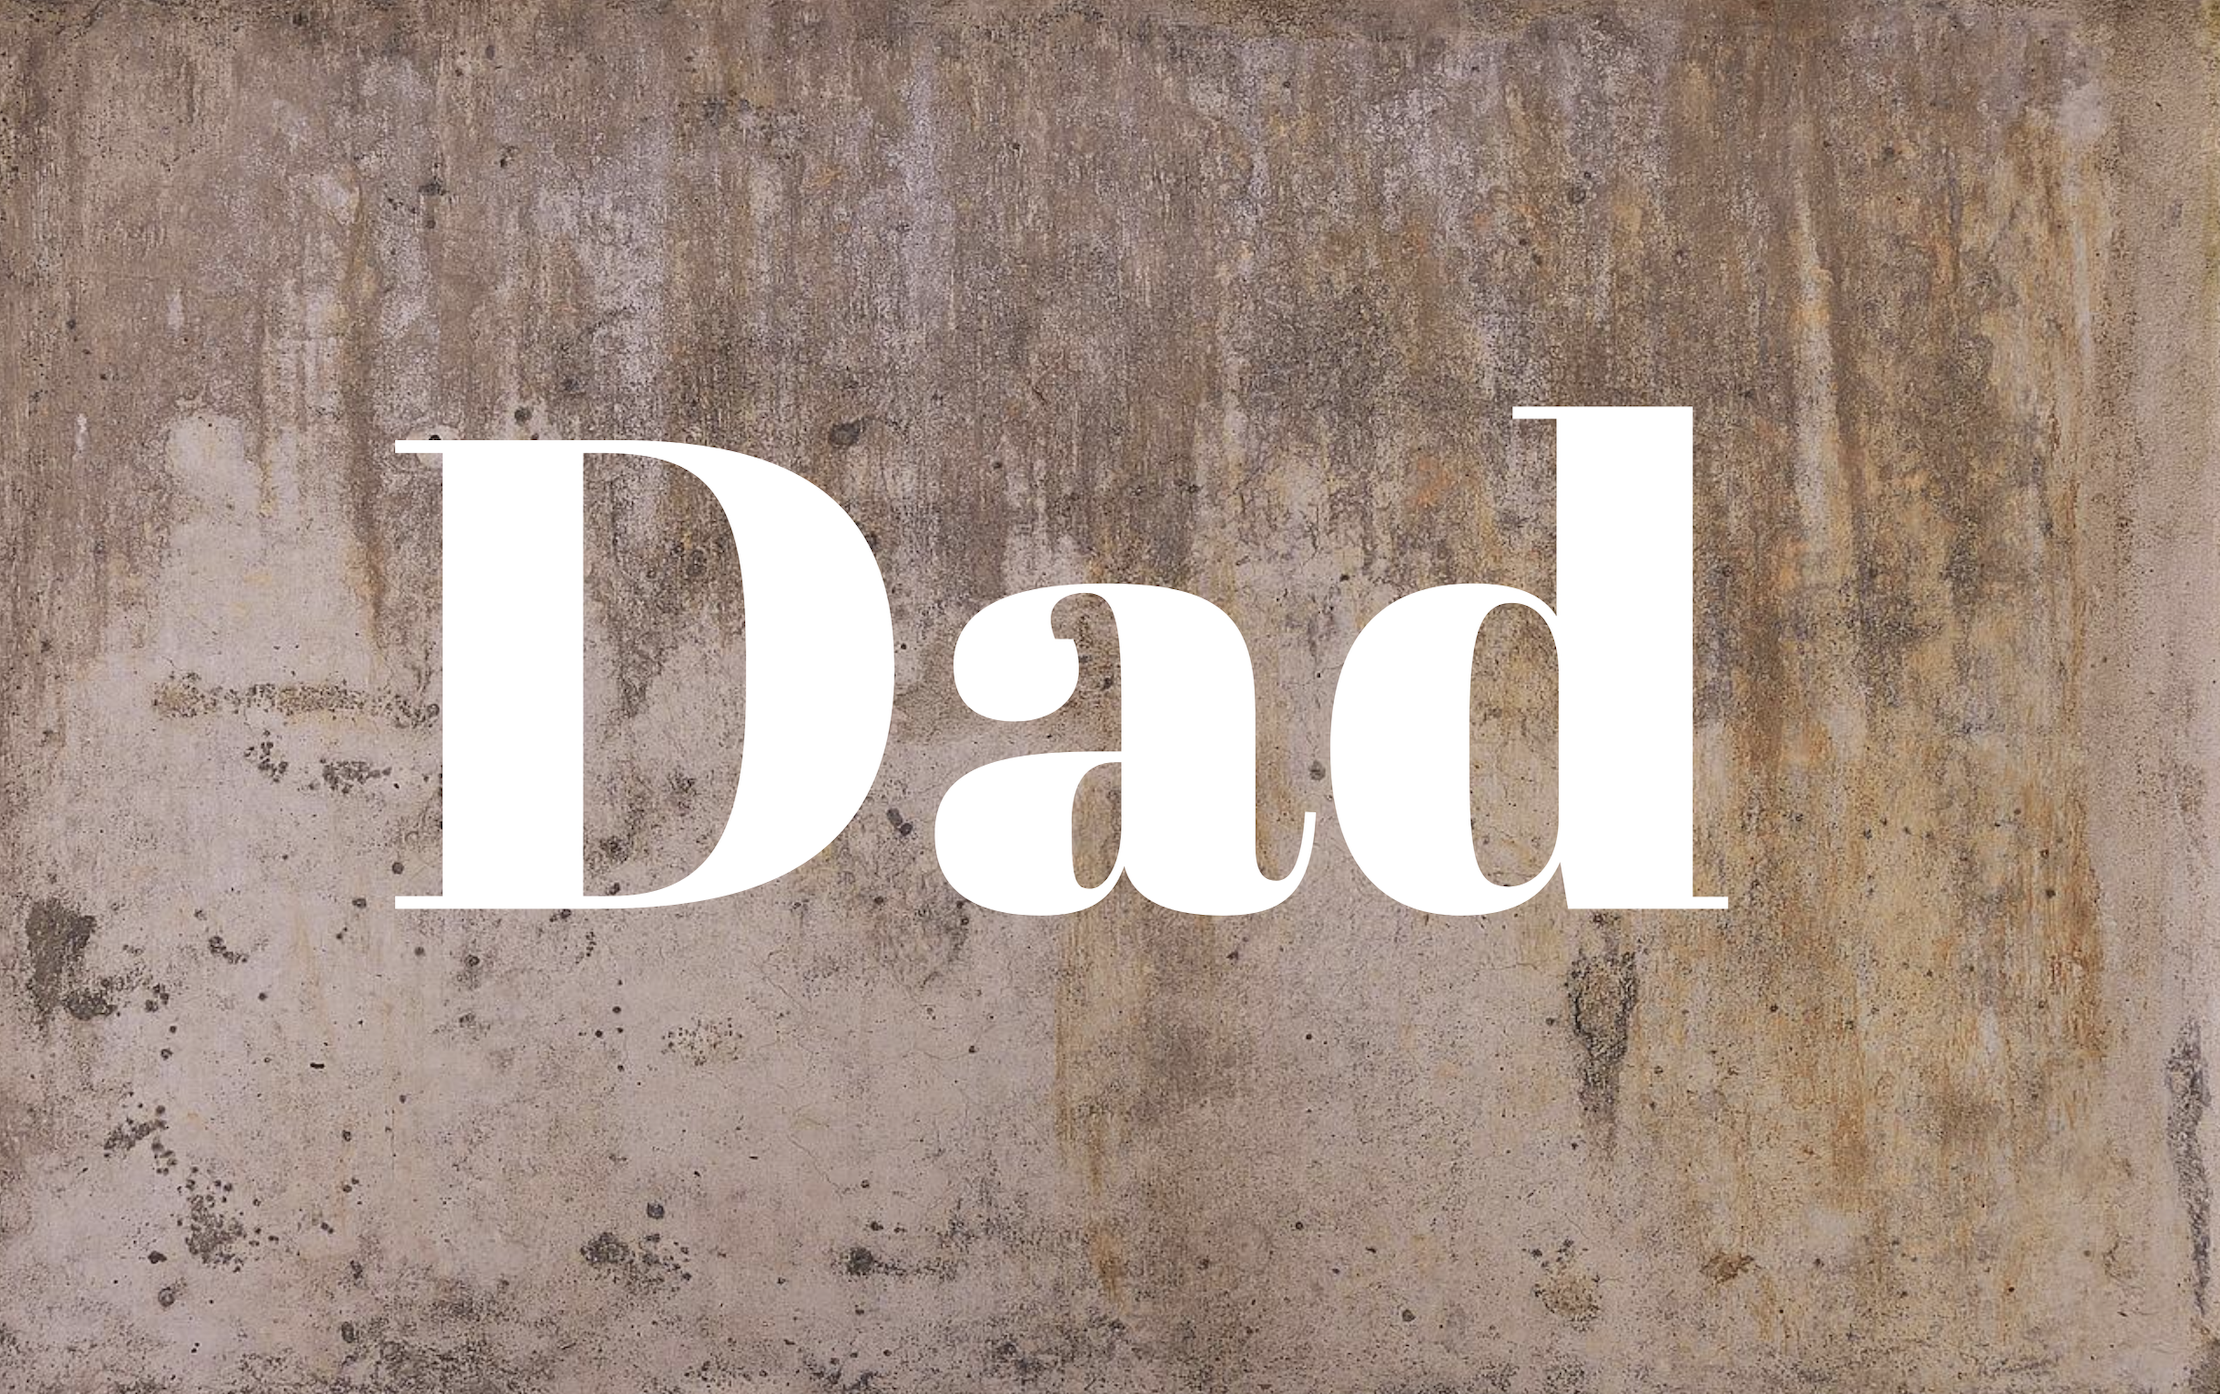 Dad Decal - Holiday Father/Dad/Dada Vinyl Decals for Home, Gifts, Businesses and More!